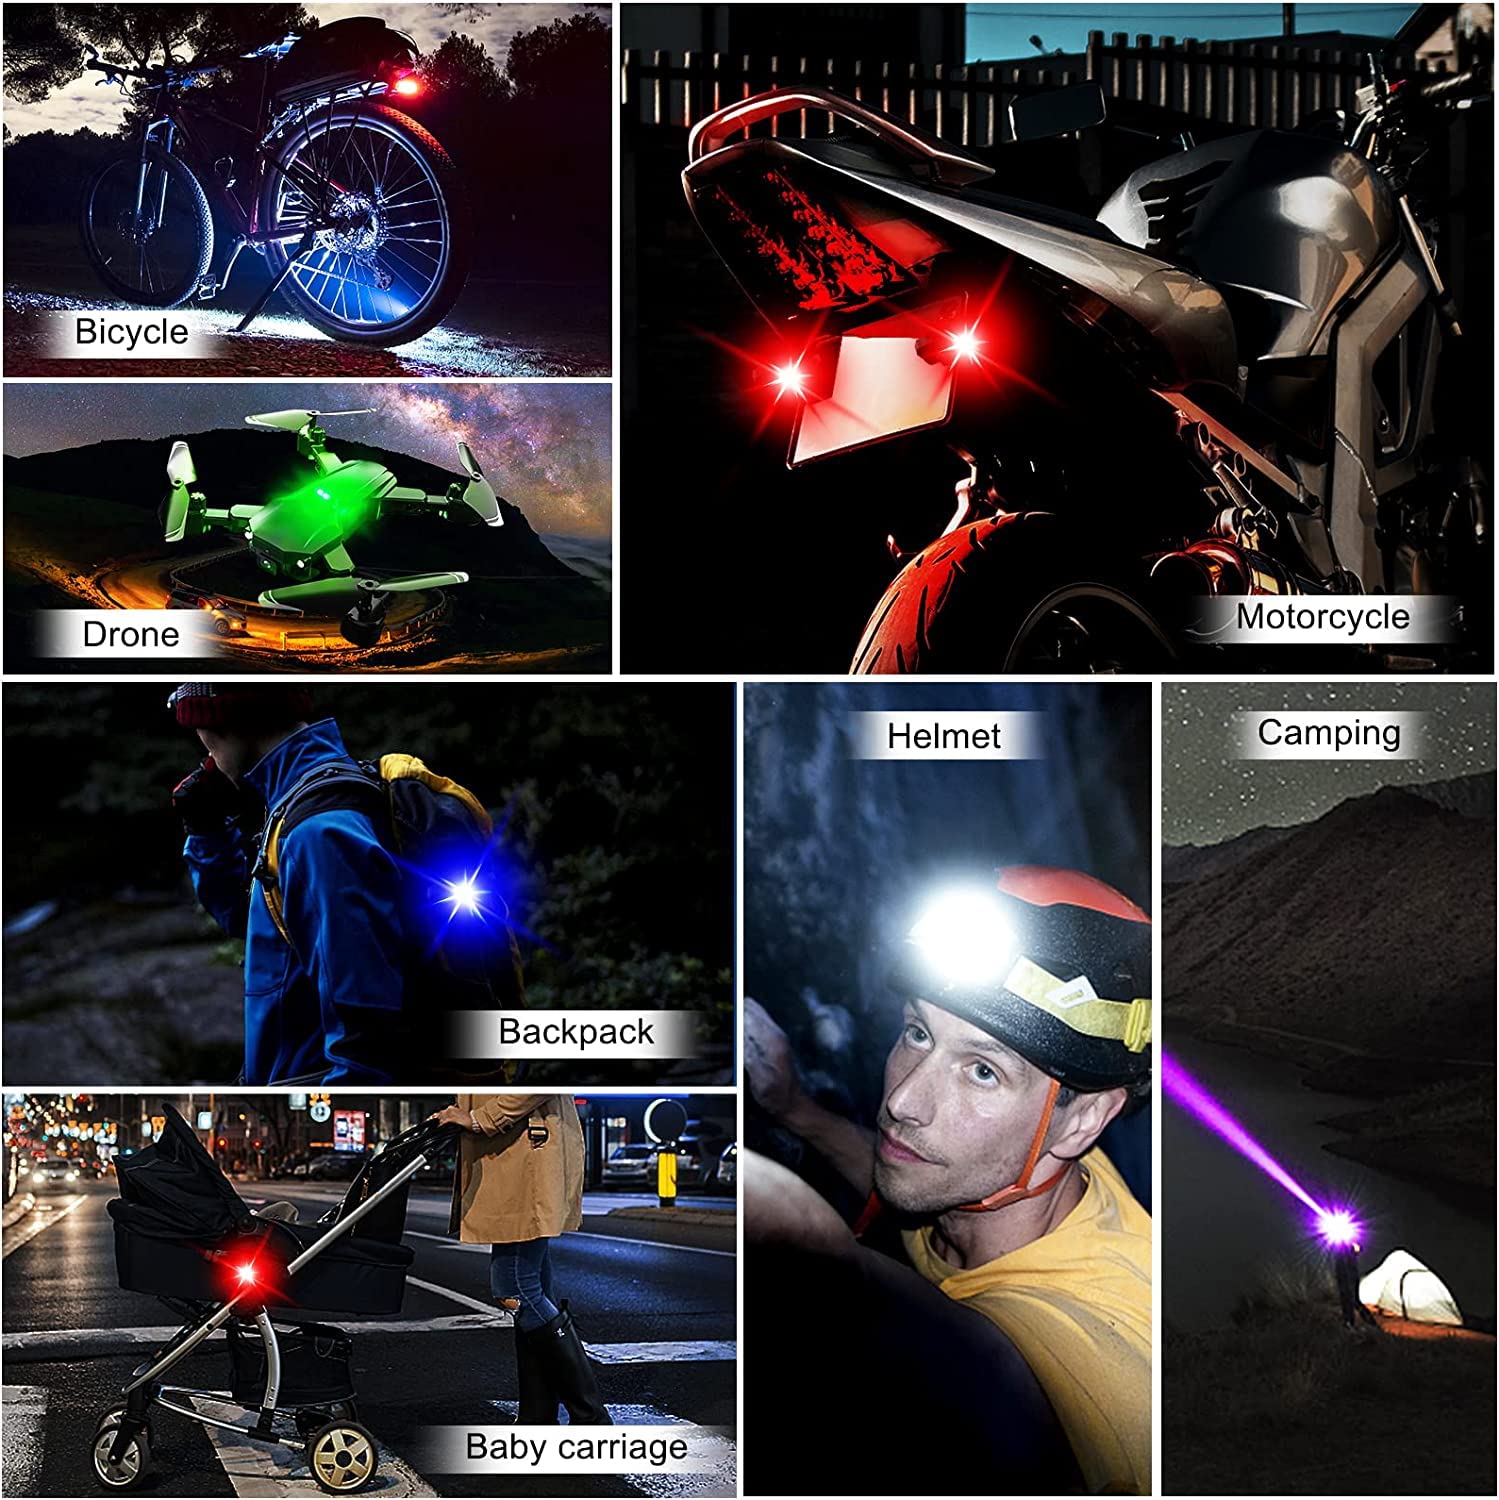 LED Aircraft Strobe Lights For Auto Car Drone Bicycle Bike Helmet Warning Lights, Led strobe light with memory function, Warning Rear Light for Motorcycle and car (5pcs)